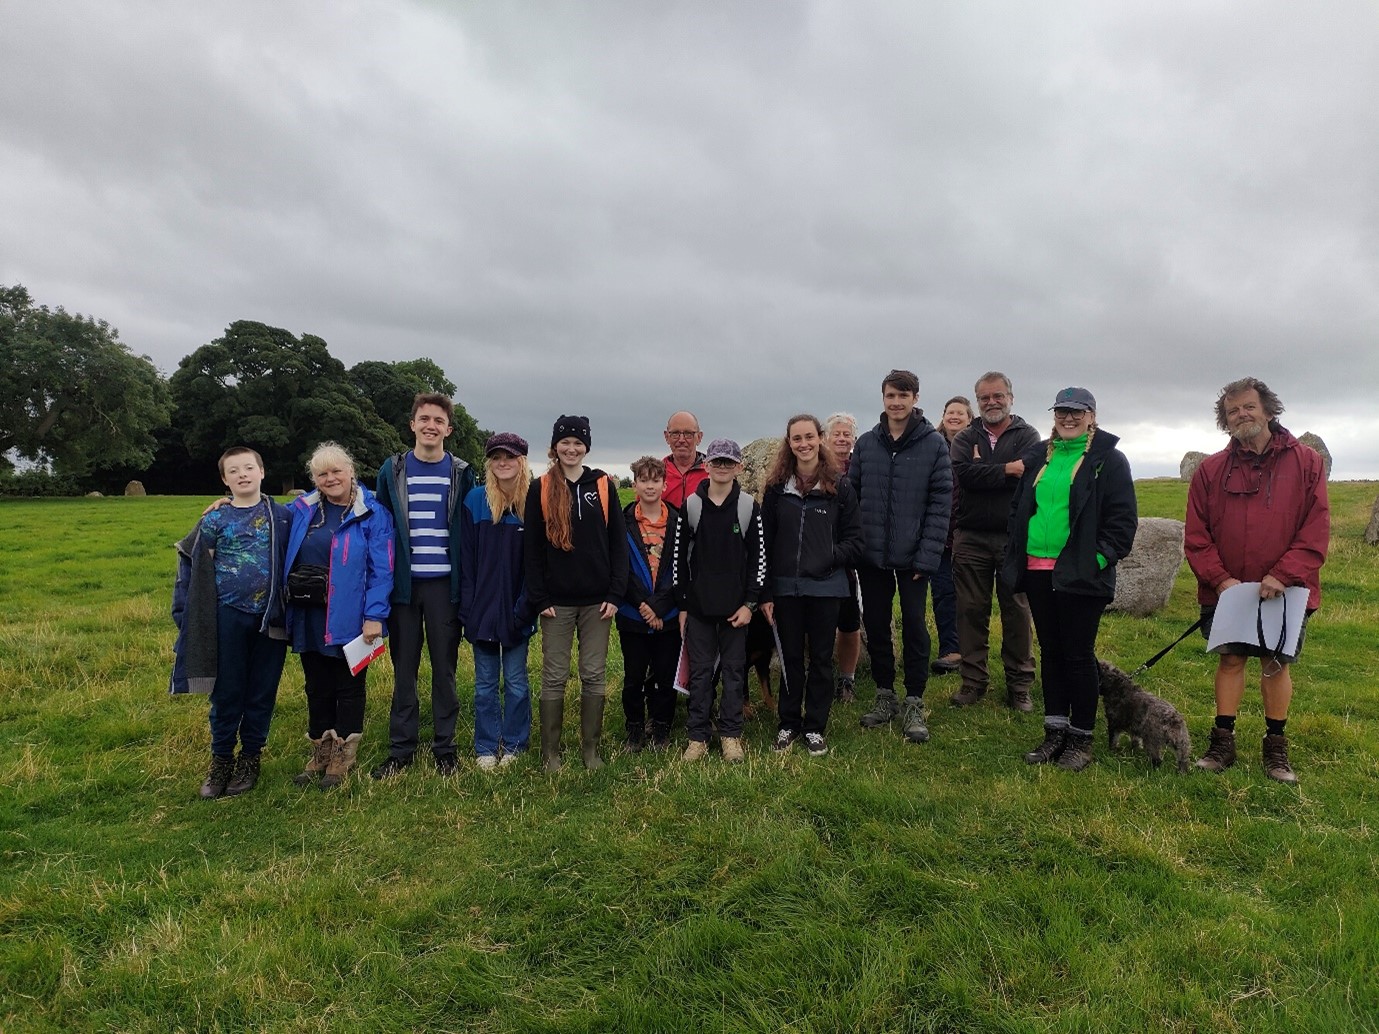 The image shows the group standing together in a field. There are some of the stones from the stone circle in the background. 